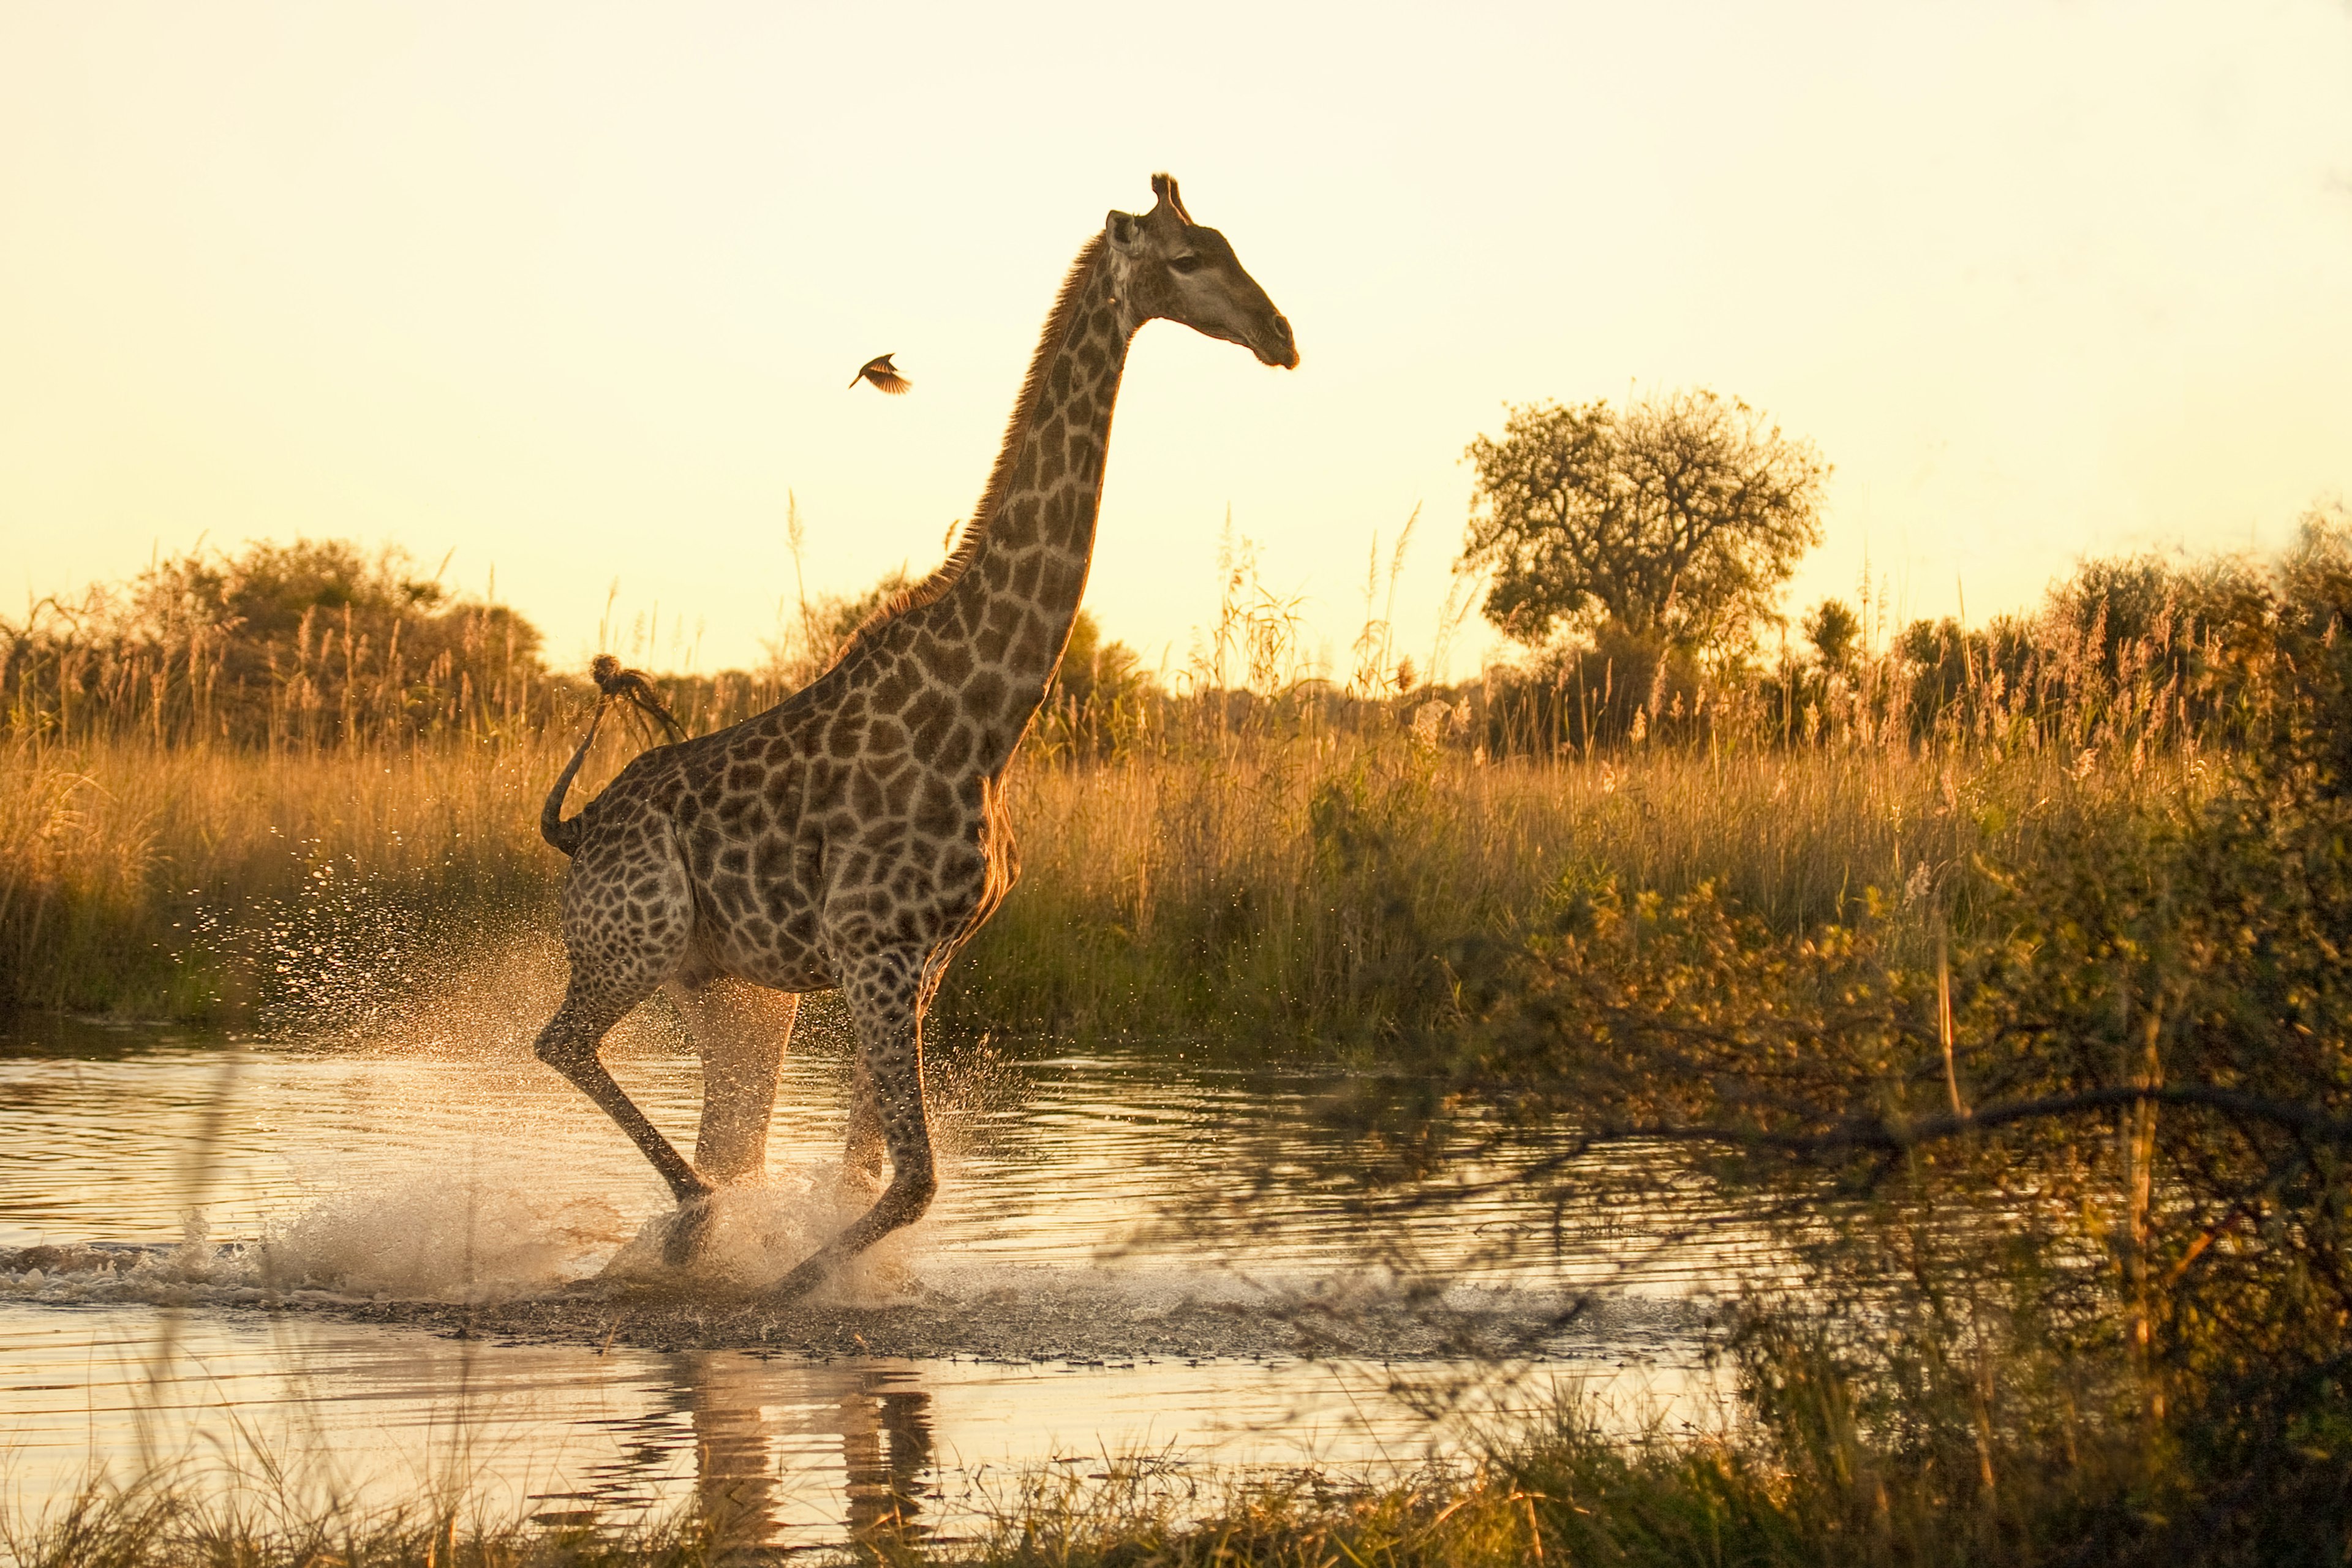 A Giraffe (Giraffa camelopardalis) running across a flooded area in the Moremi Game Reserve, with a small oxpecker flying nearby..